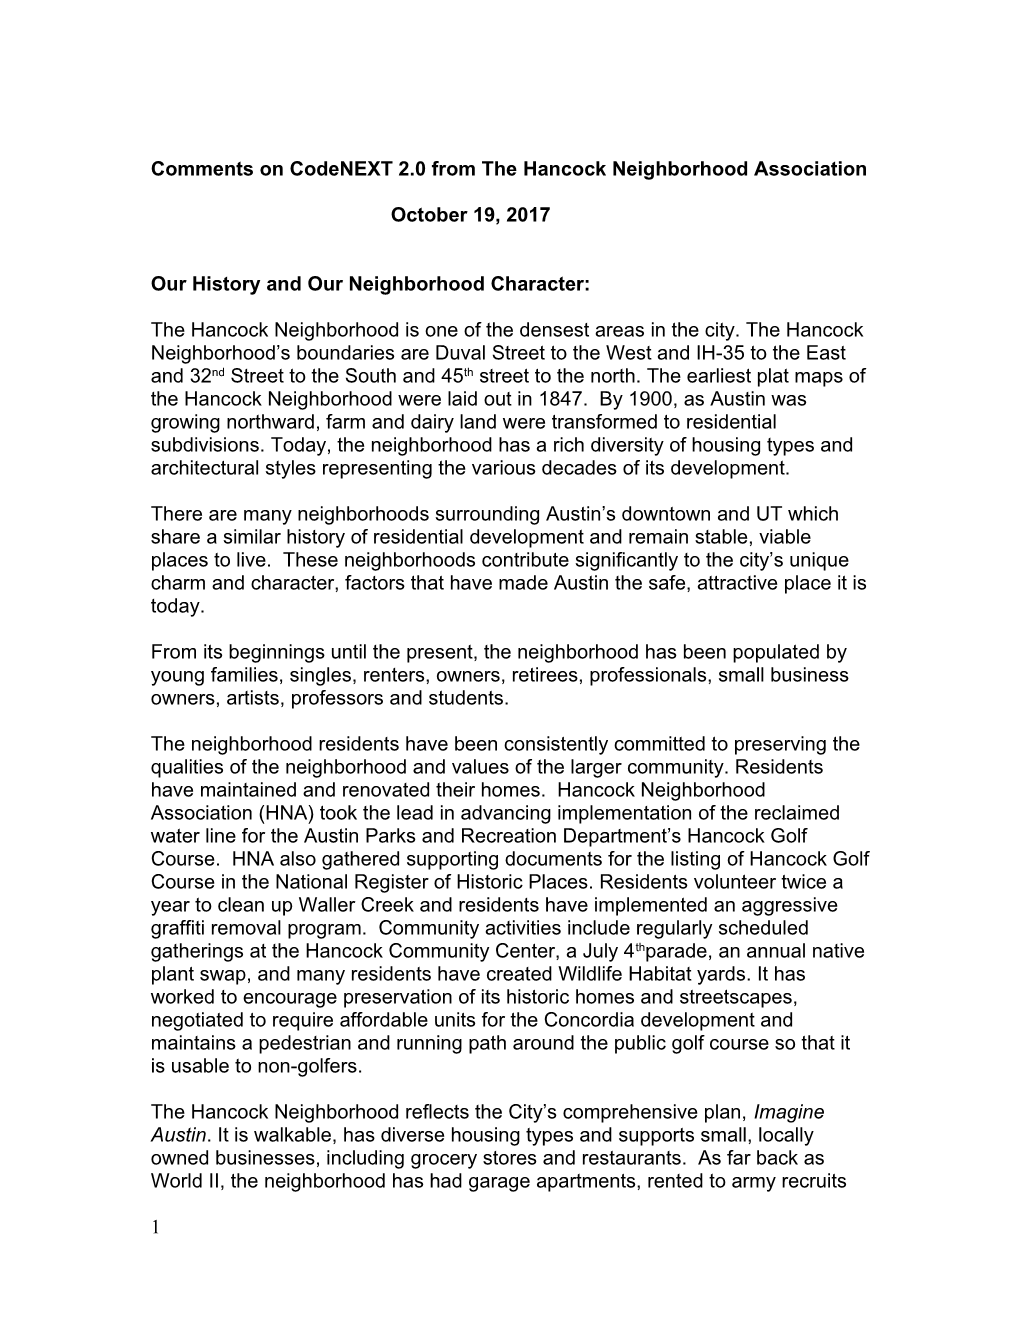 Comments on Codenext 2.0 from the Hancock Neighborhood Association